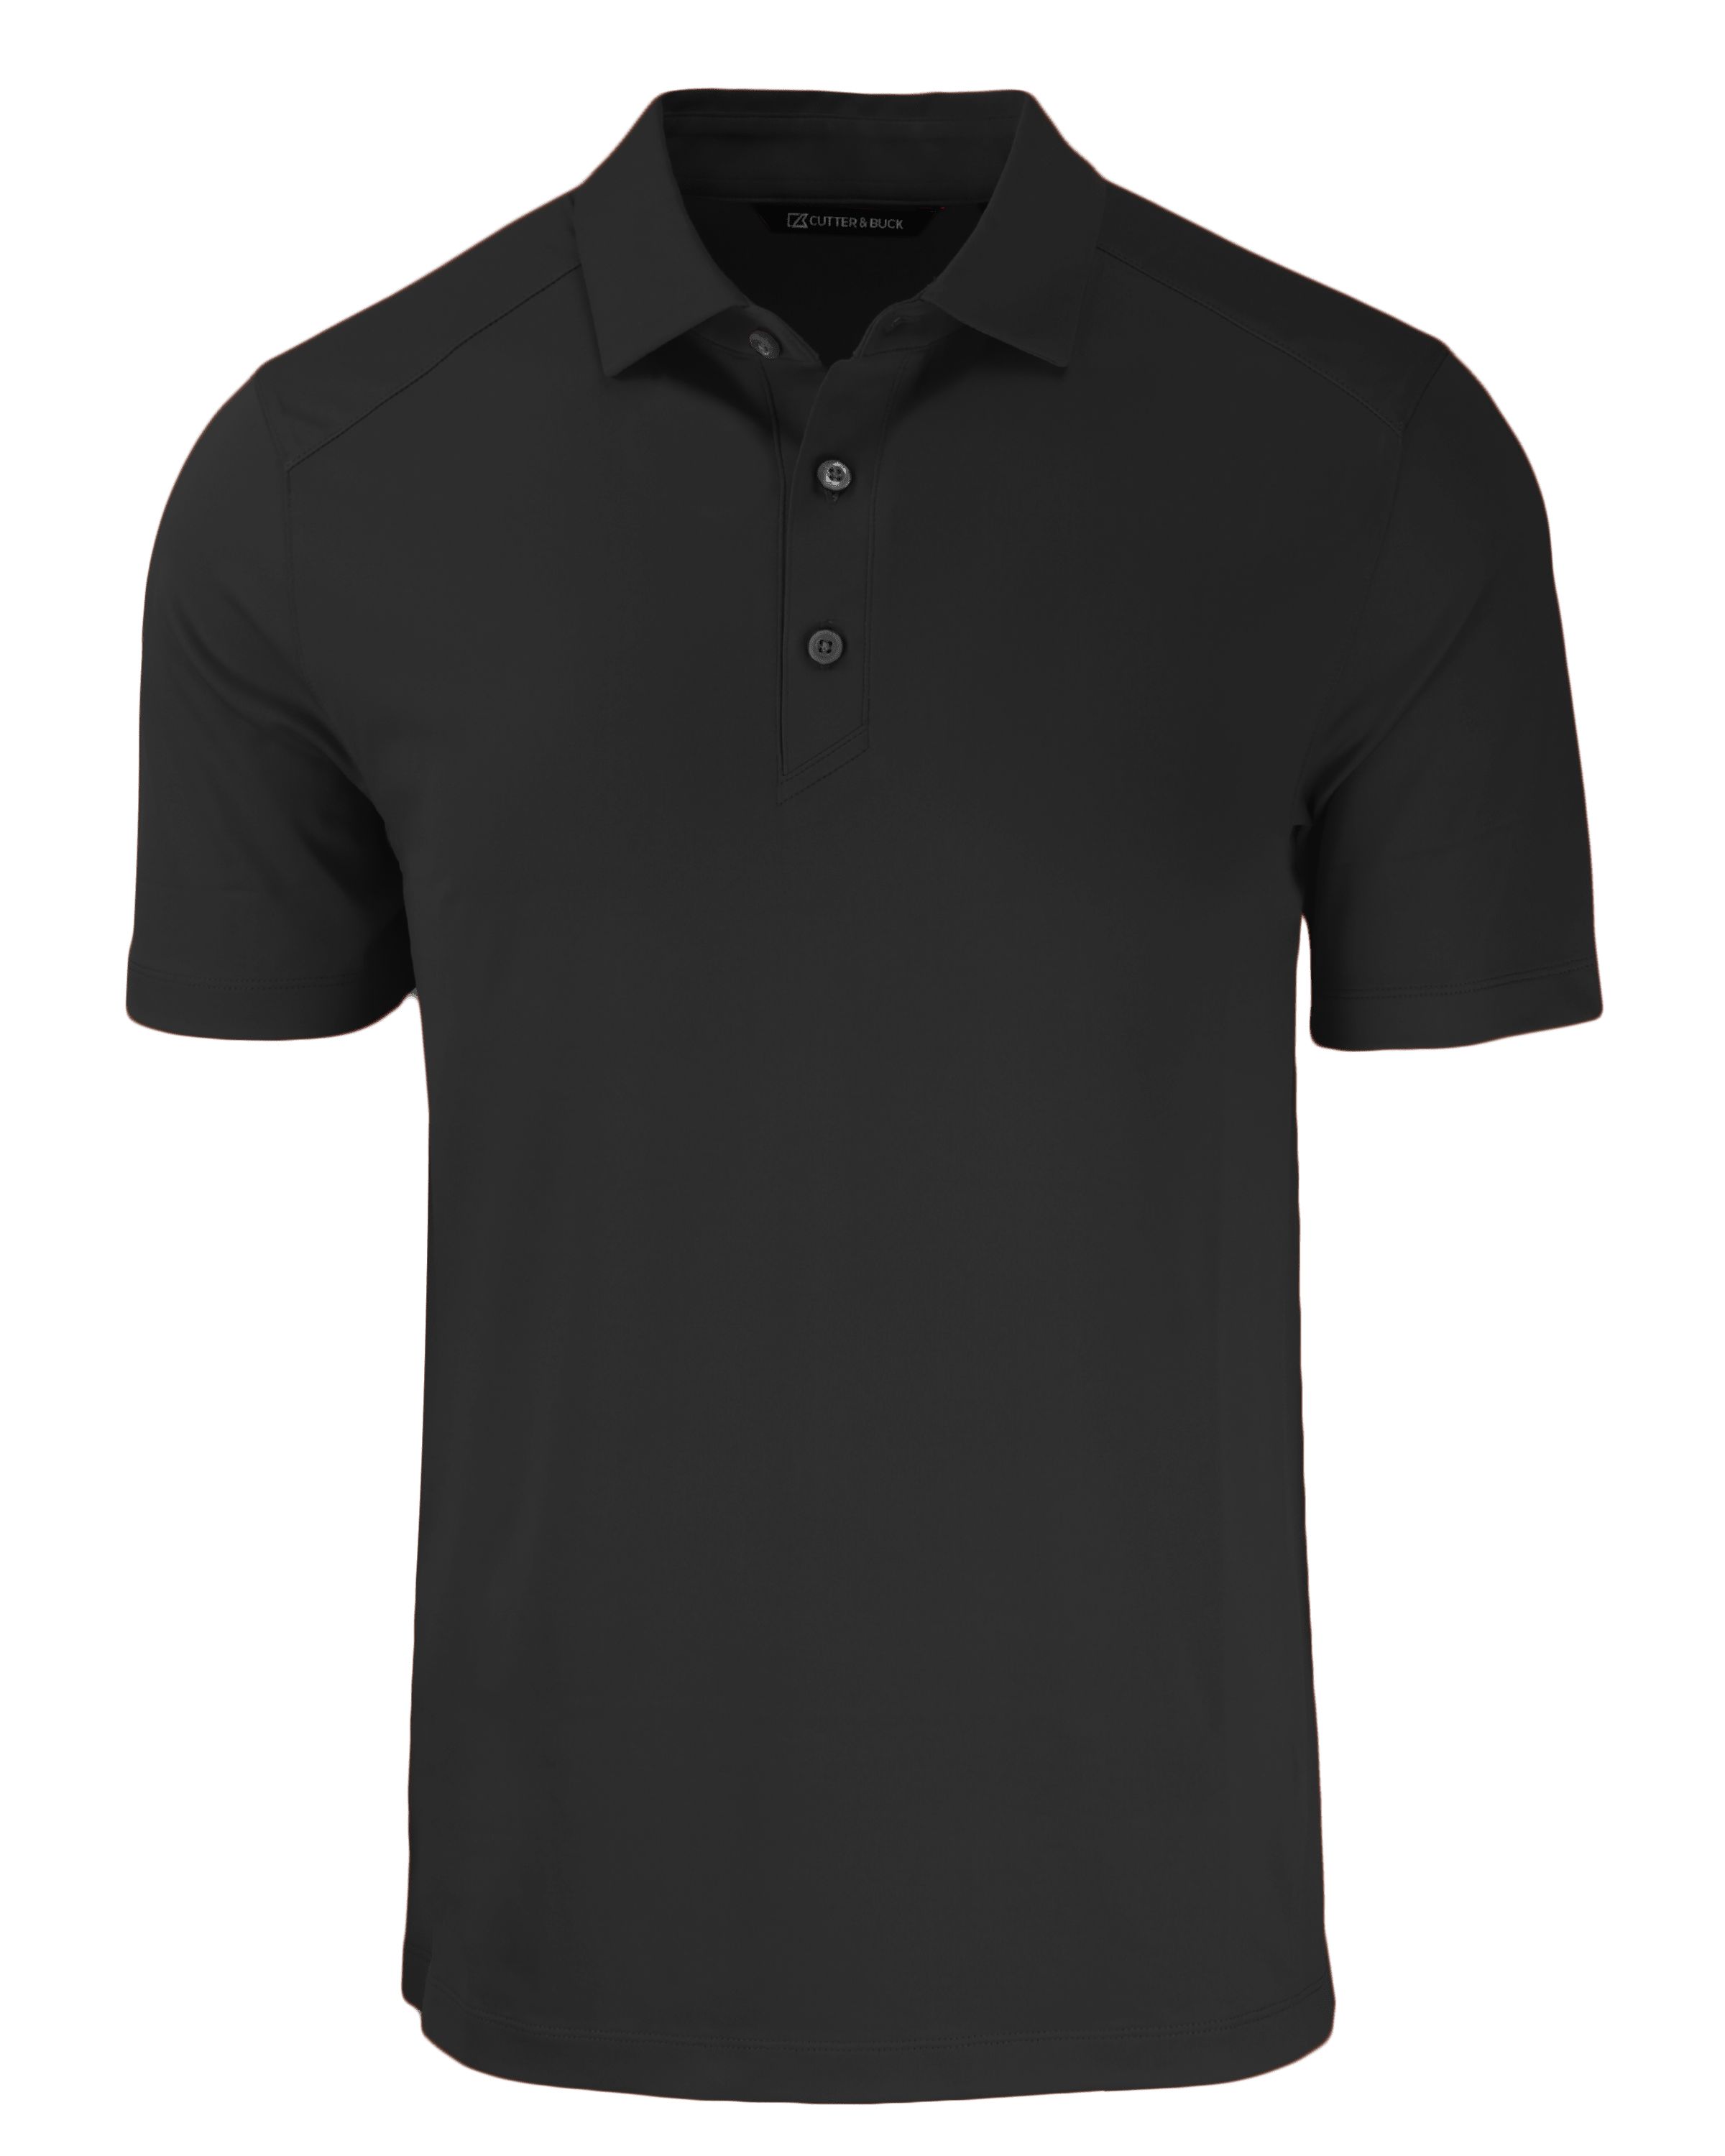 CUTTER & BUCK BCK01236 - Men's Forge Eco Stretch Recycled Big & Tall Polo